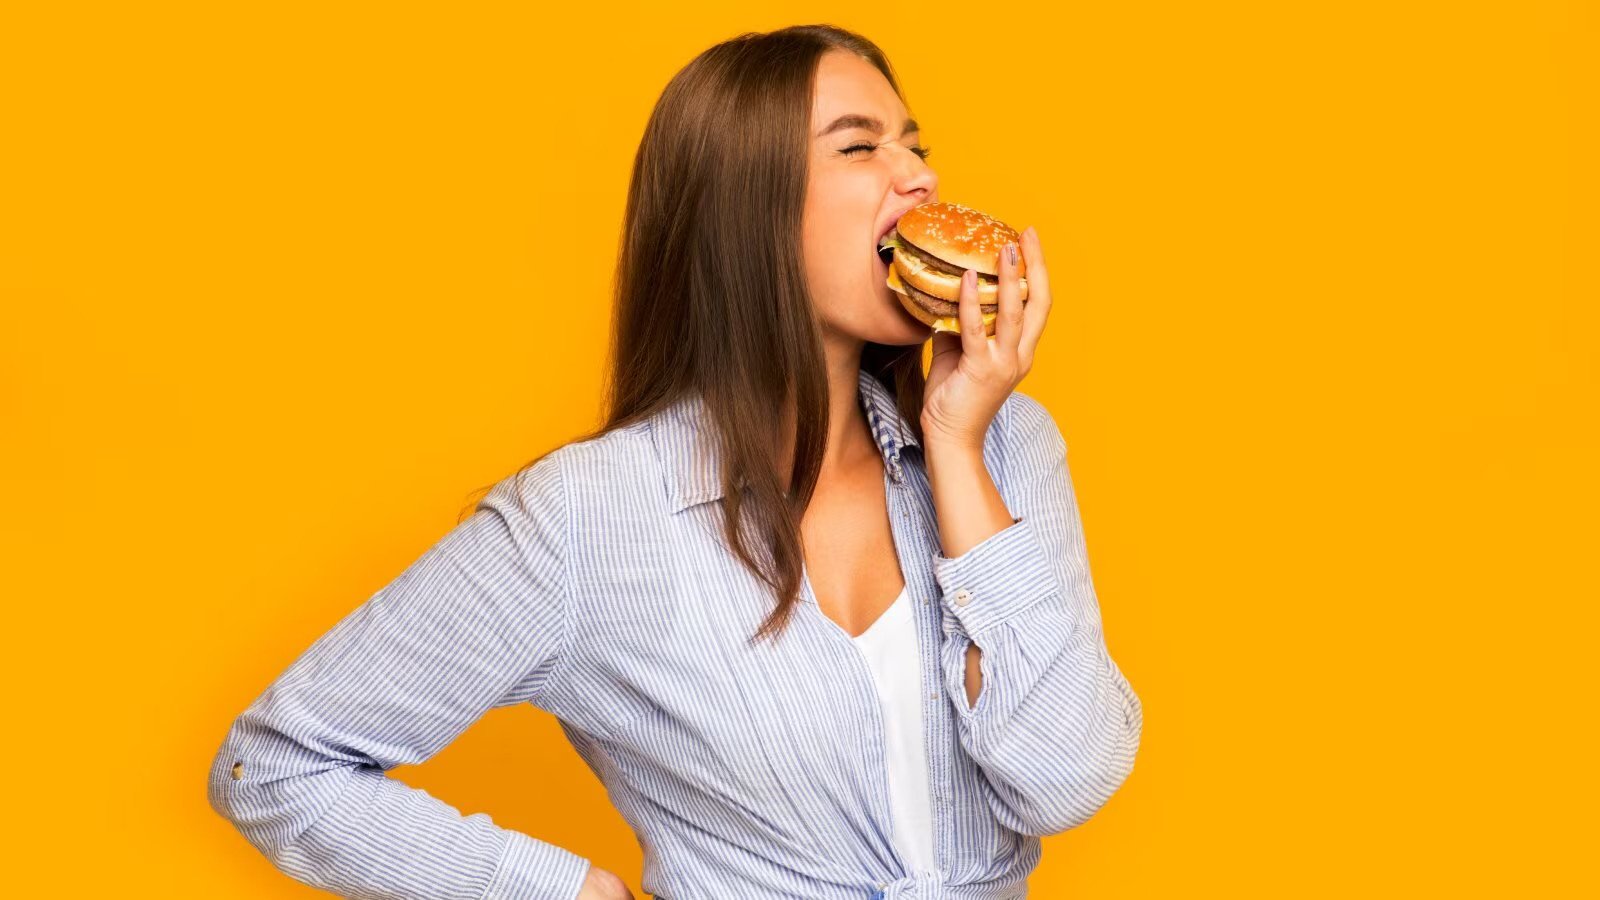 Top 10 “Unhealthy” Foods That Are Actually Good for You